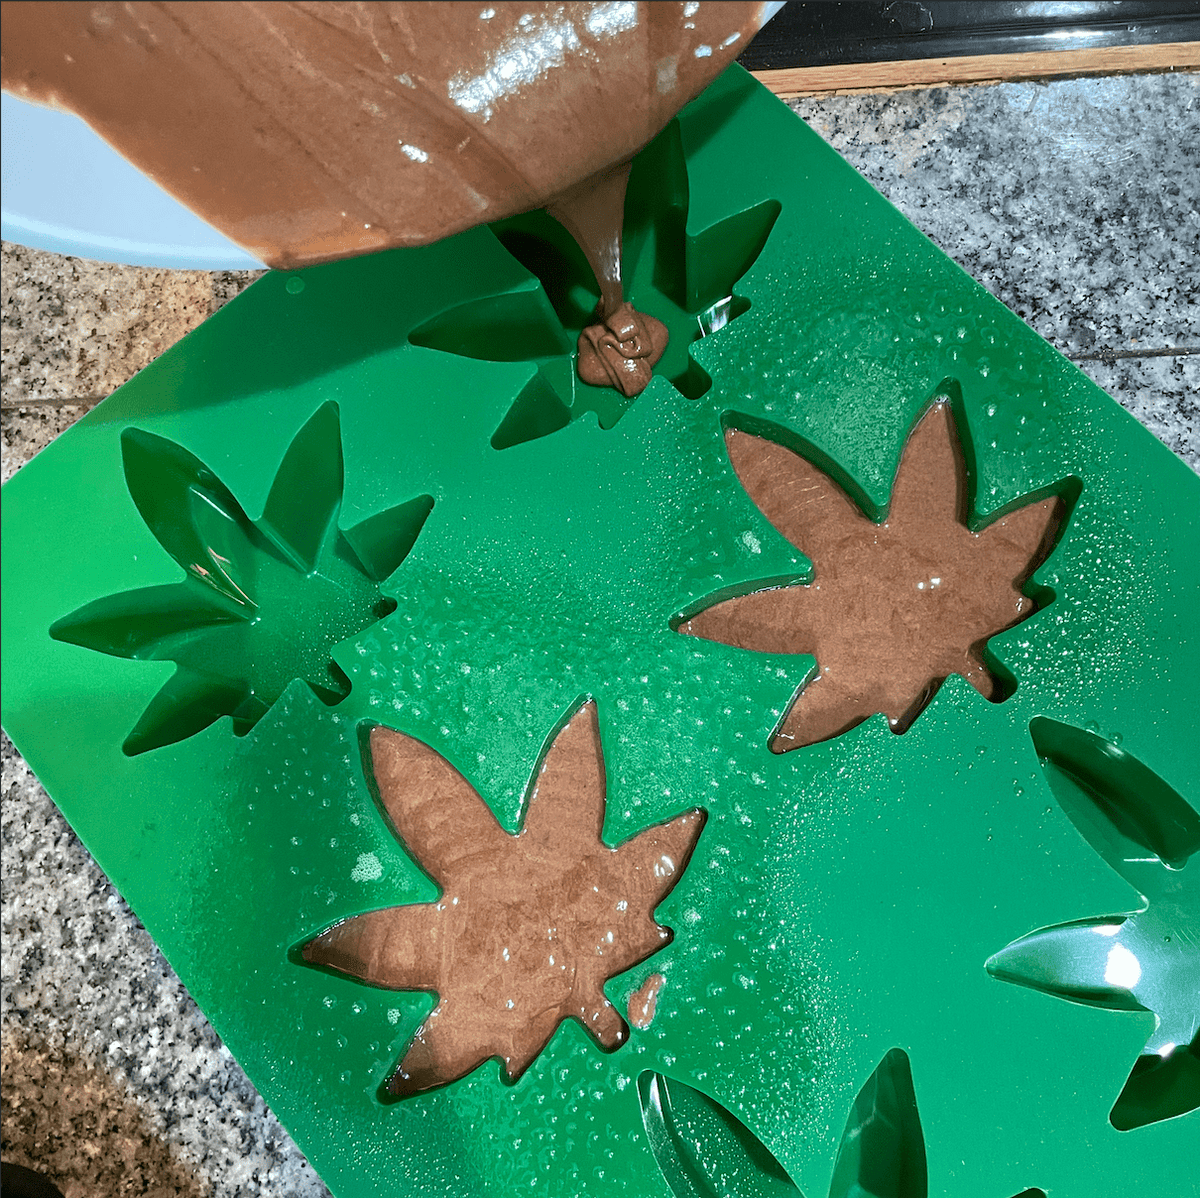 Pot Leaf Muffin and Cupcake Mold